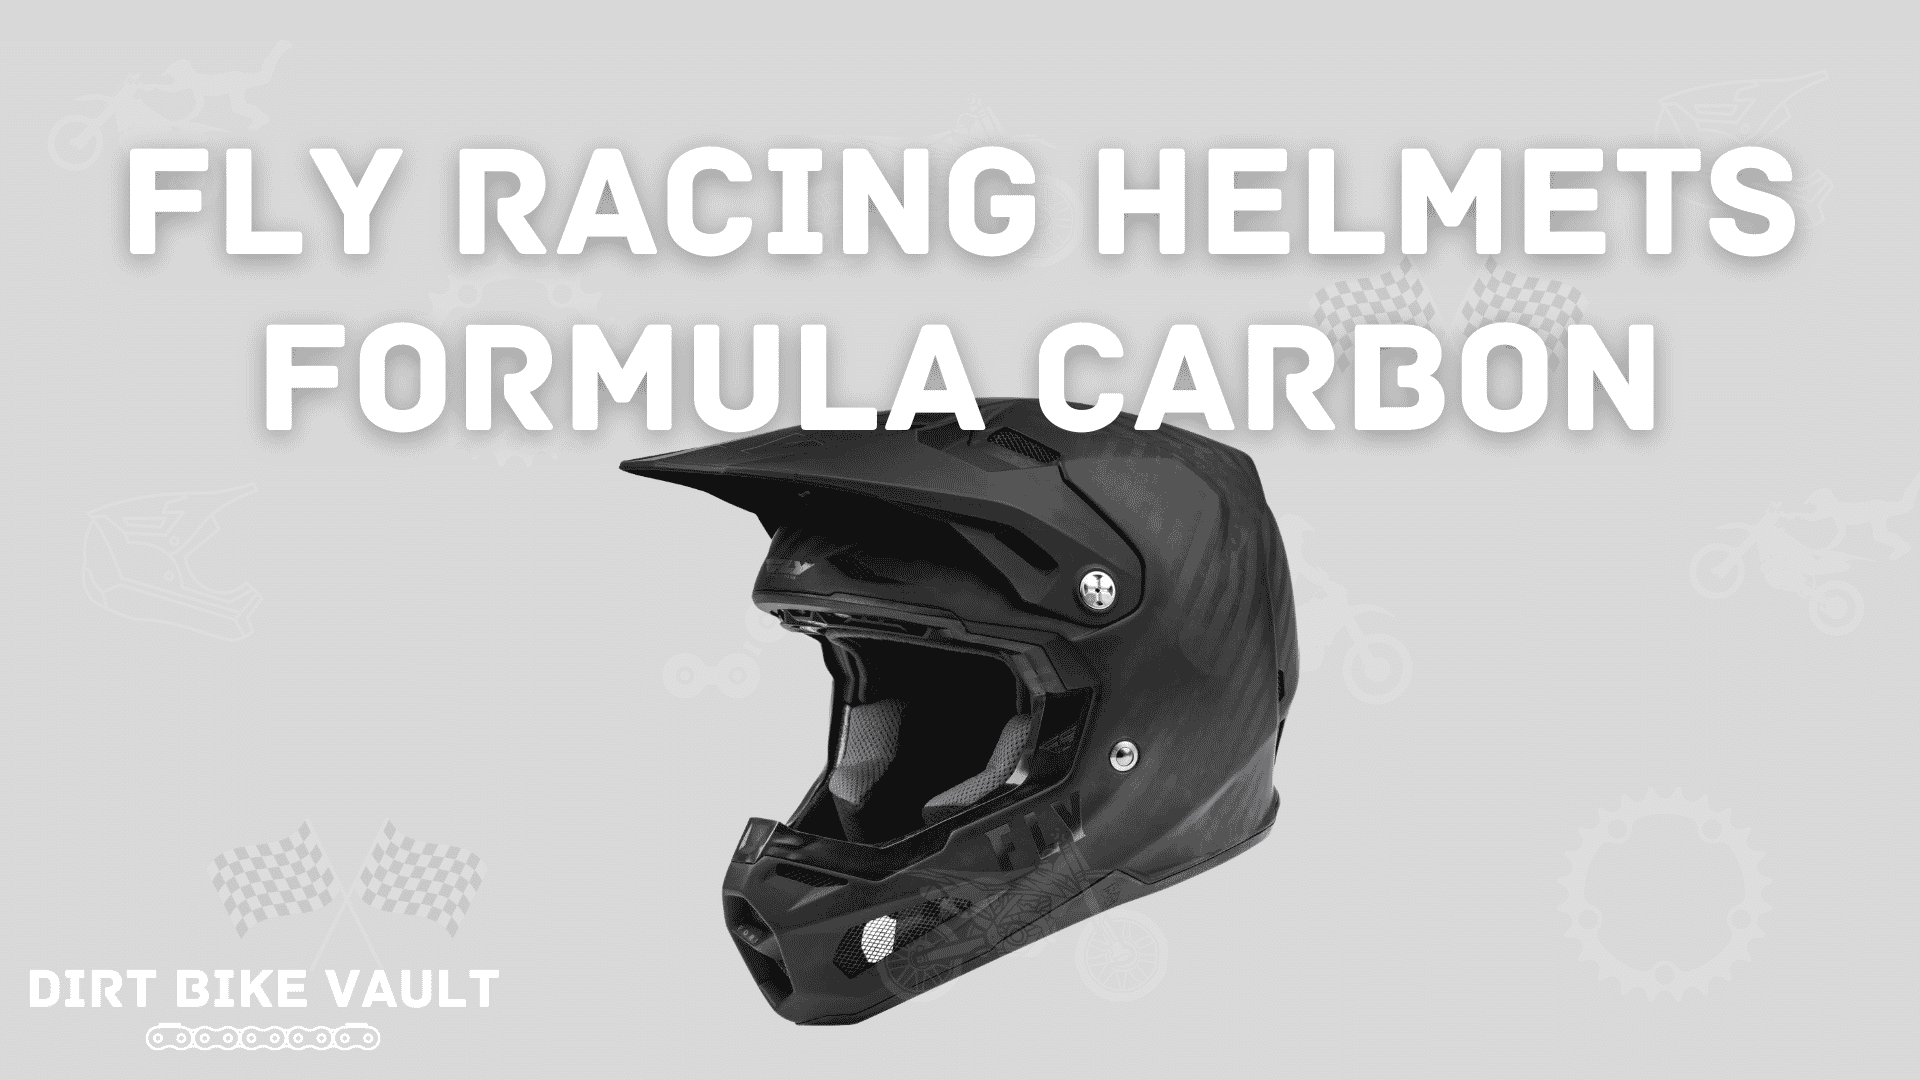 Fly Racing Helmets Formula Carbon in white text on light gray background with image of black Fly Racing helmet